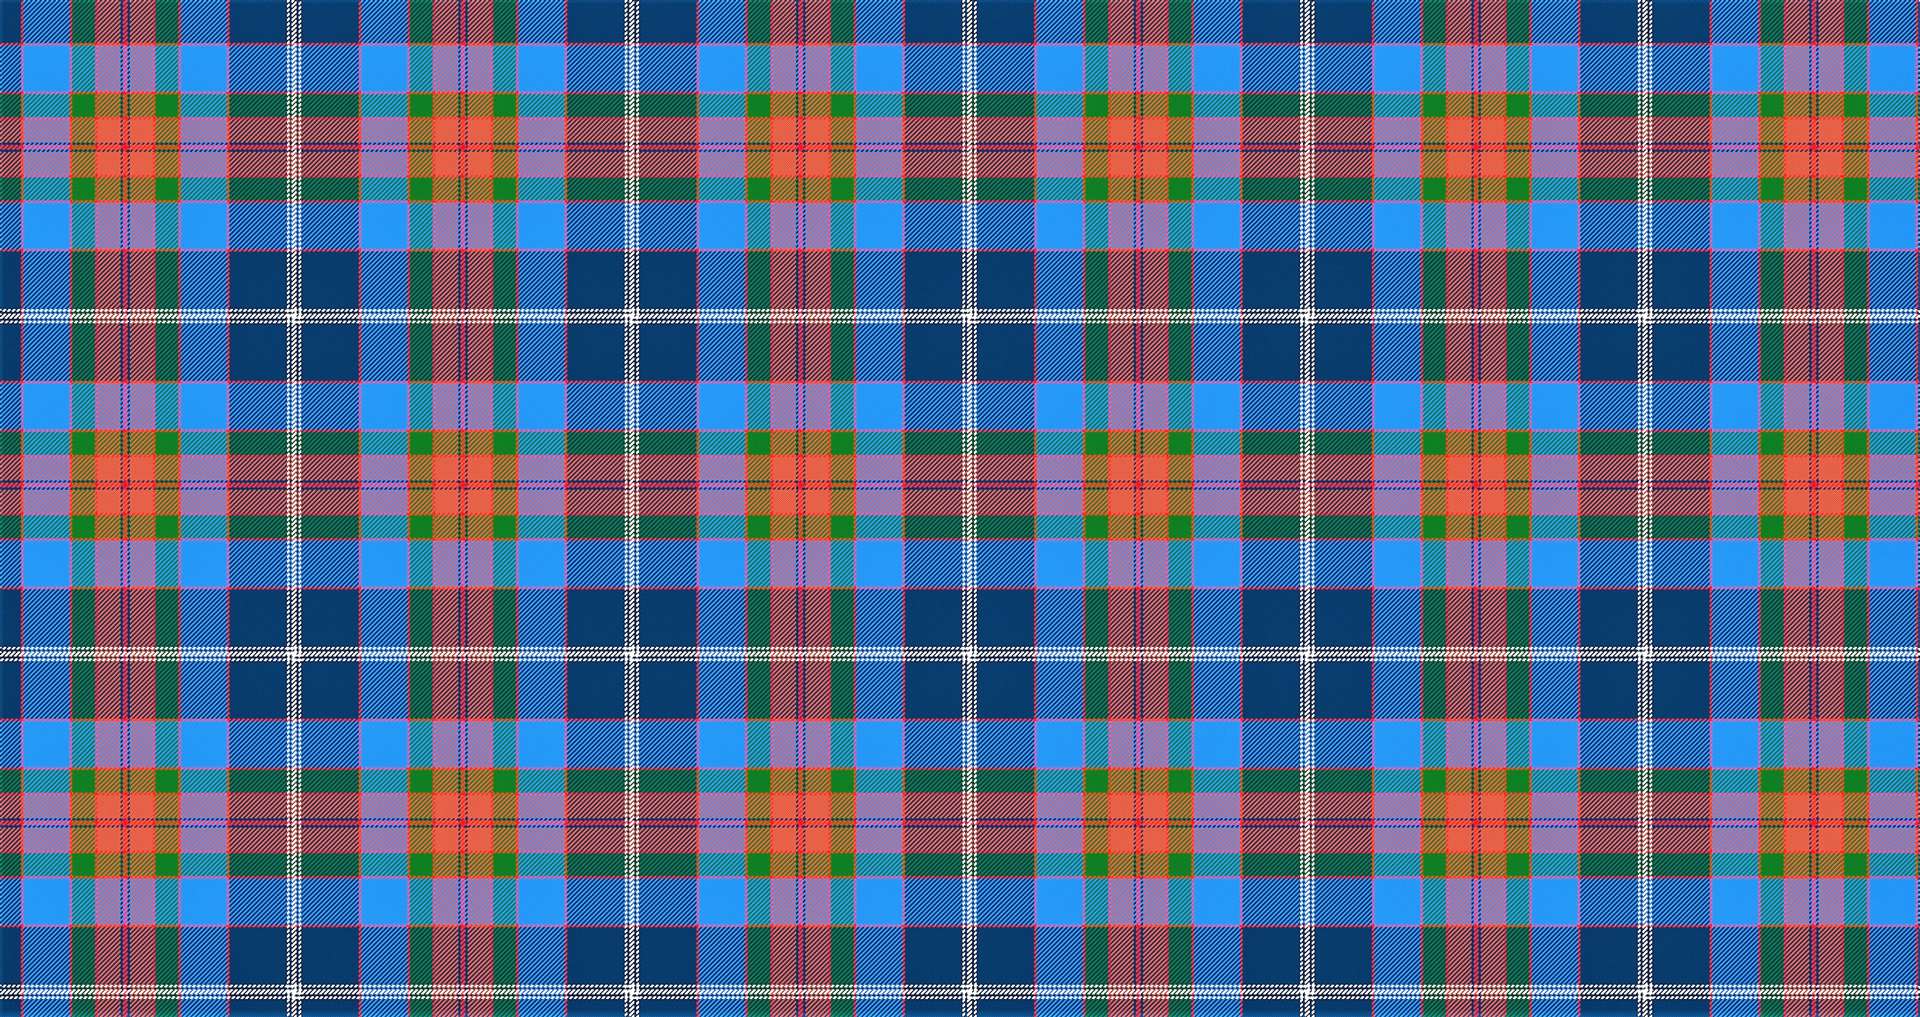 Created by Brian Wilton MBE, the Mey Highland Games tartan captures the spirit of the event.